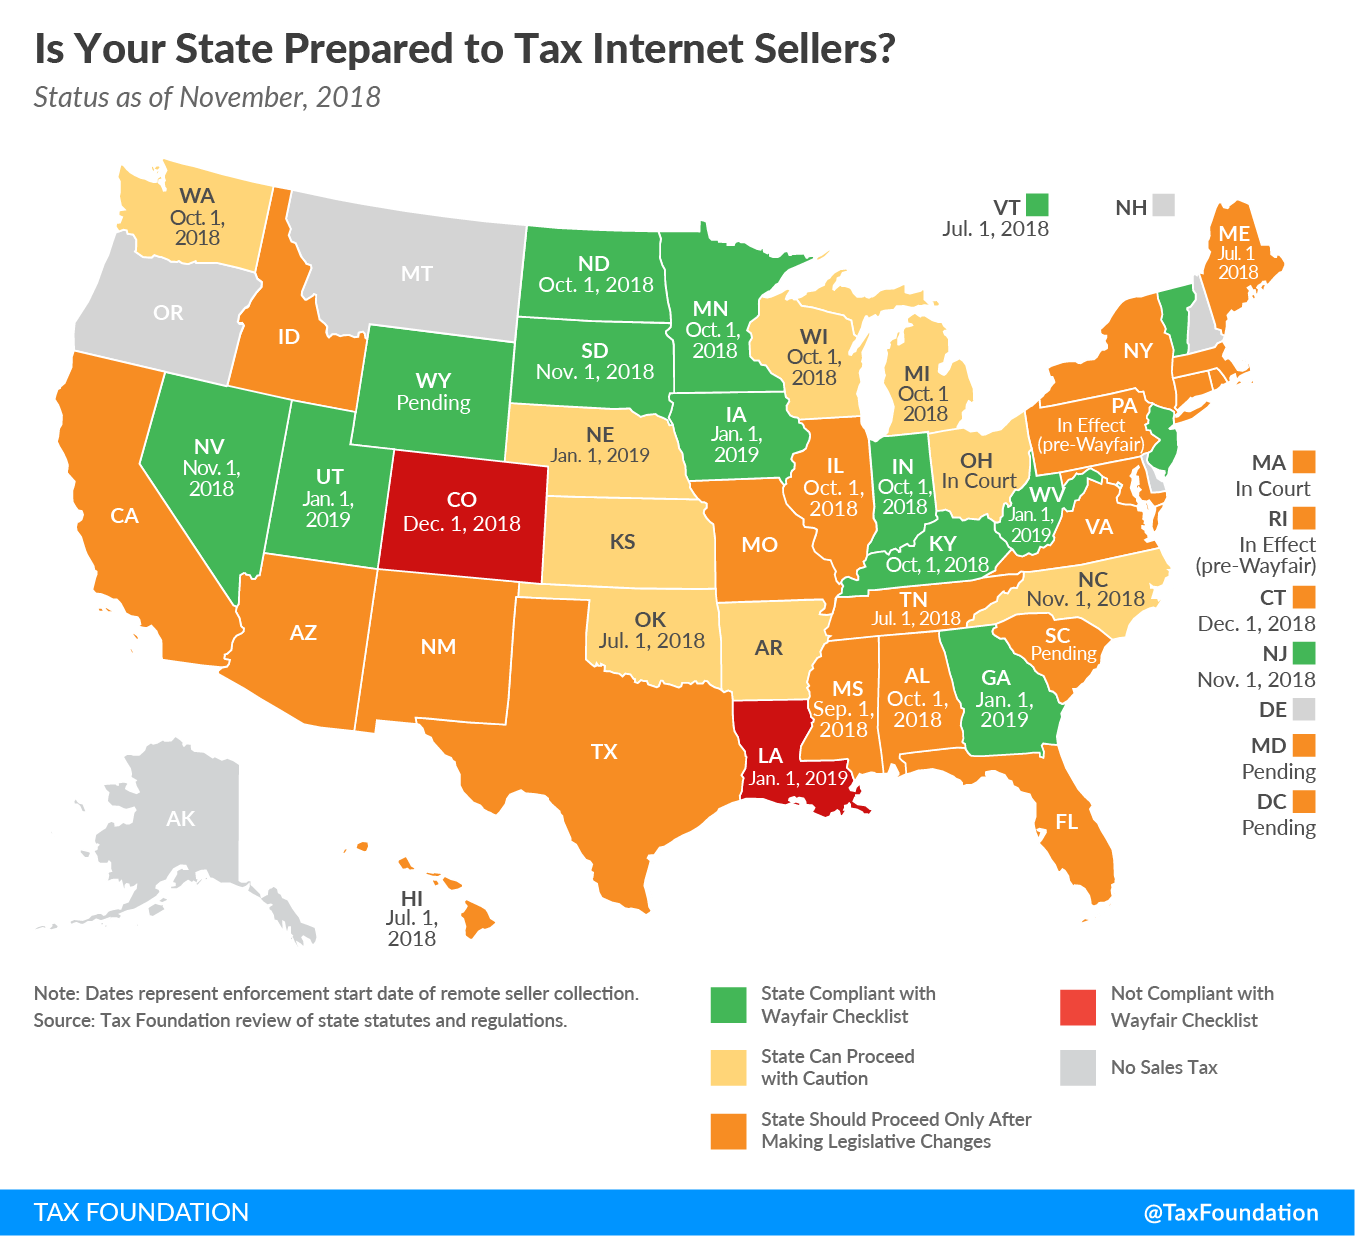 Is Your State Prepared to Tax Internet Sellers?